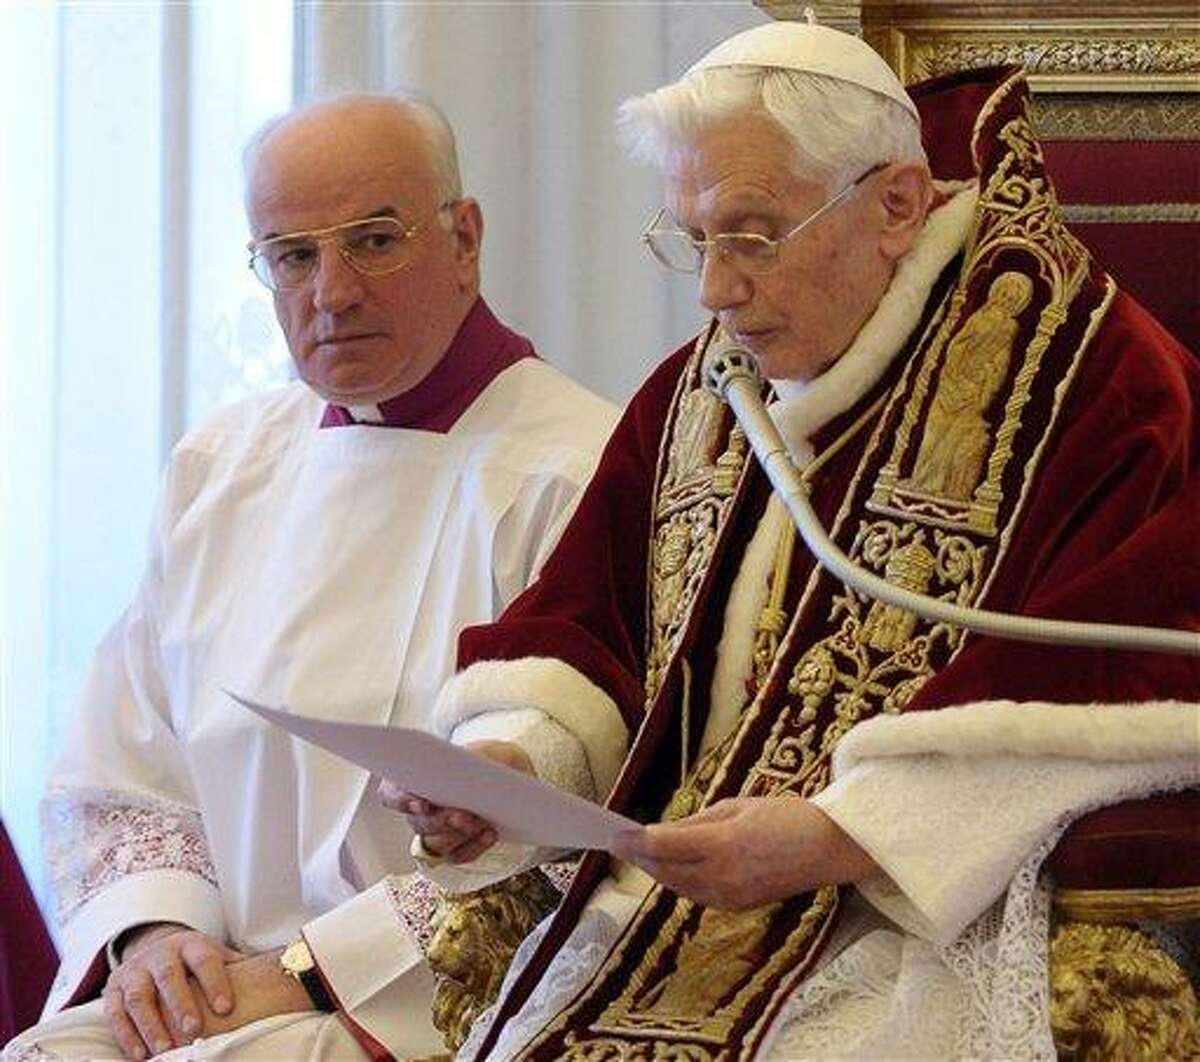 In this photo provided by the Vatican newspaper L'Osservatore Romano, Mons. Franco Comaldo, left, a pope aide, looks at Pope Benedict XVI as he reads a document in Latin where he announces his resignation, during a meeting of Vatican cardinals, at the Vatican, Monday, Feb. 11, 2013. Benedict XVI announced Monday that he would resign Feb. 28 - the first pontiff to do so in nearly 600 years. The decision sets the stage for a conclave to elect a new pope before the end of March. (AP Photo/L'Osservatore Romano, ho)